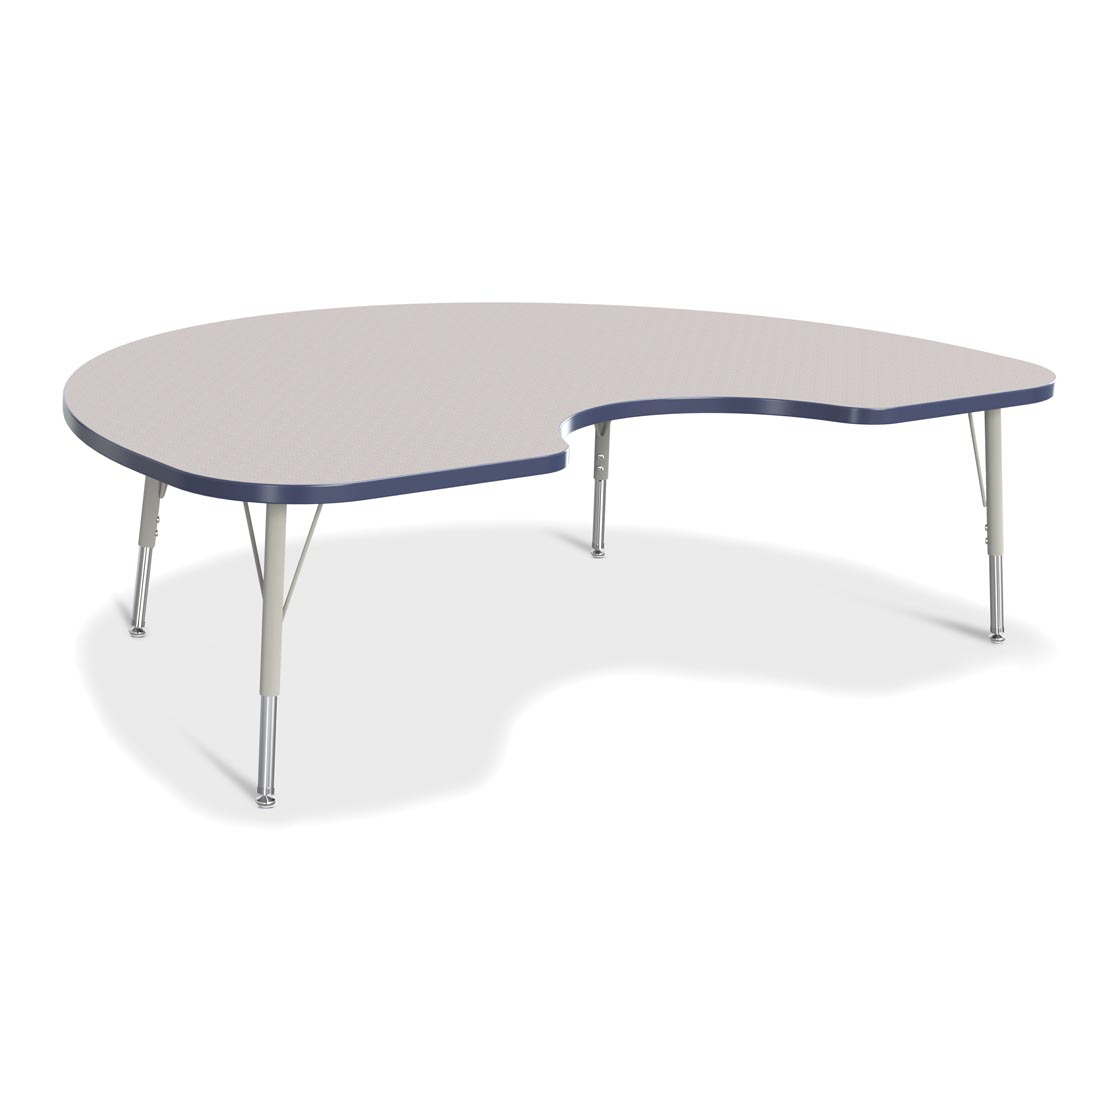 Berries Kidney Activity Table Elementary Height Gray With Navy Edge